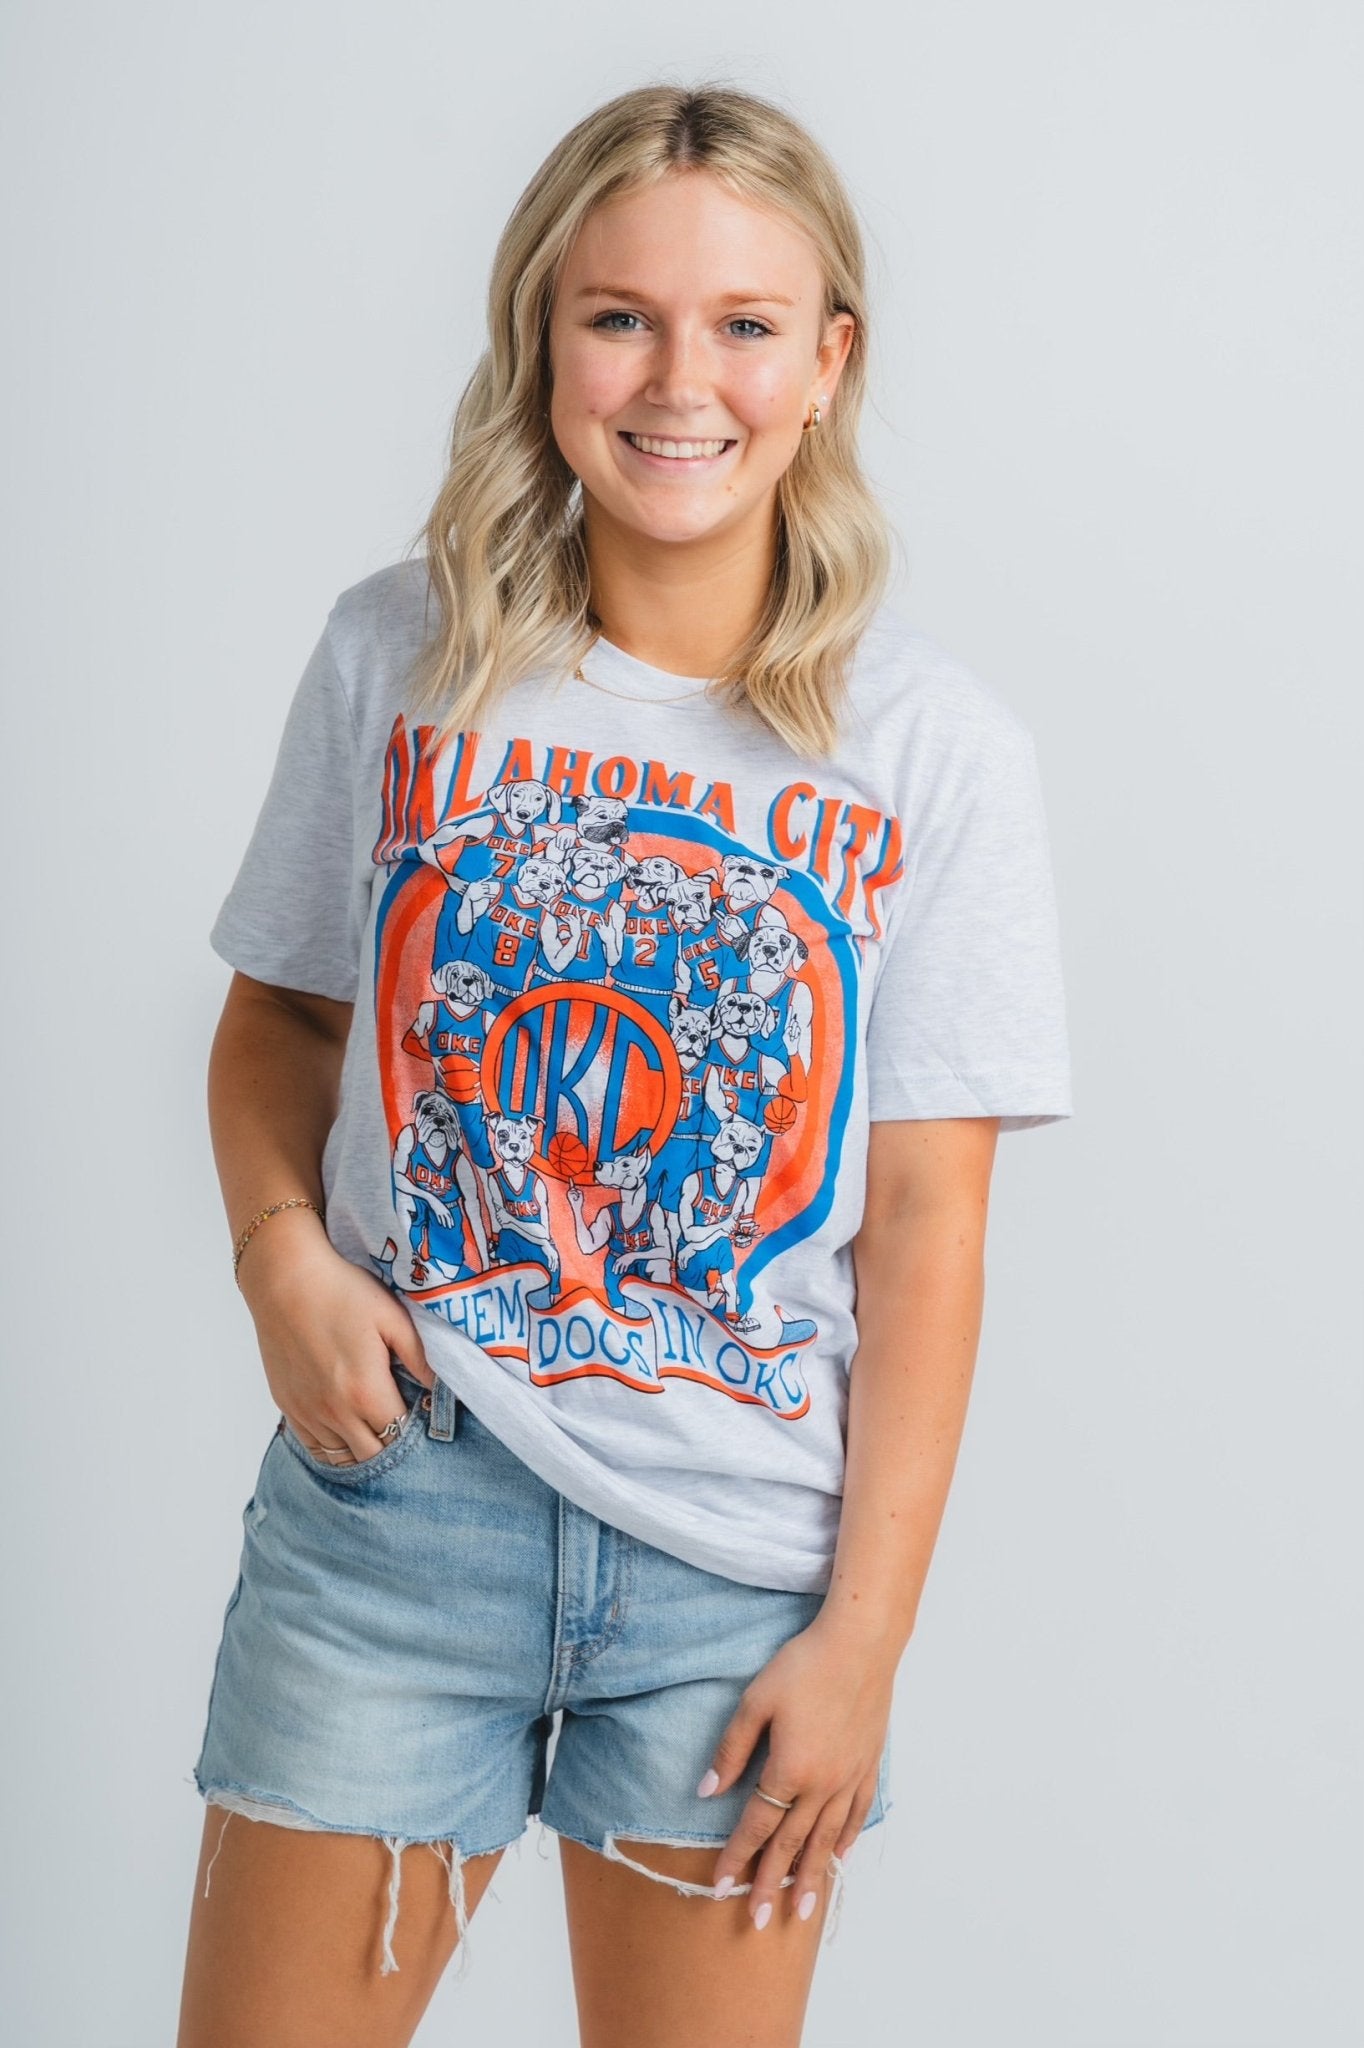 Got them dogs in OKC basketball t-shirt ash - Oklahoma City inspired graphic t-shirts at Lush Fashion Lounge Boutique in Oklahoma City